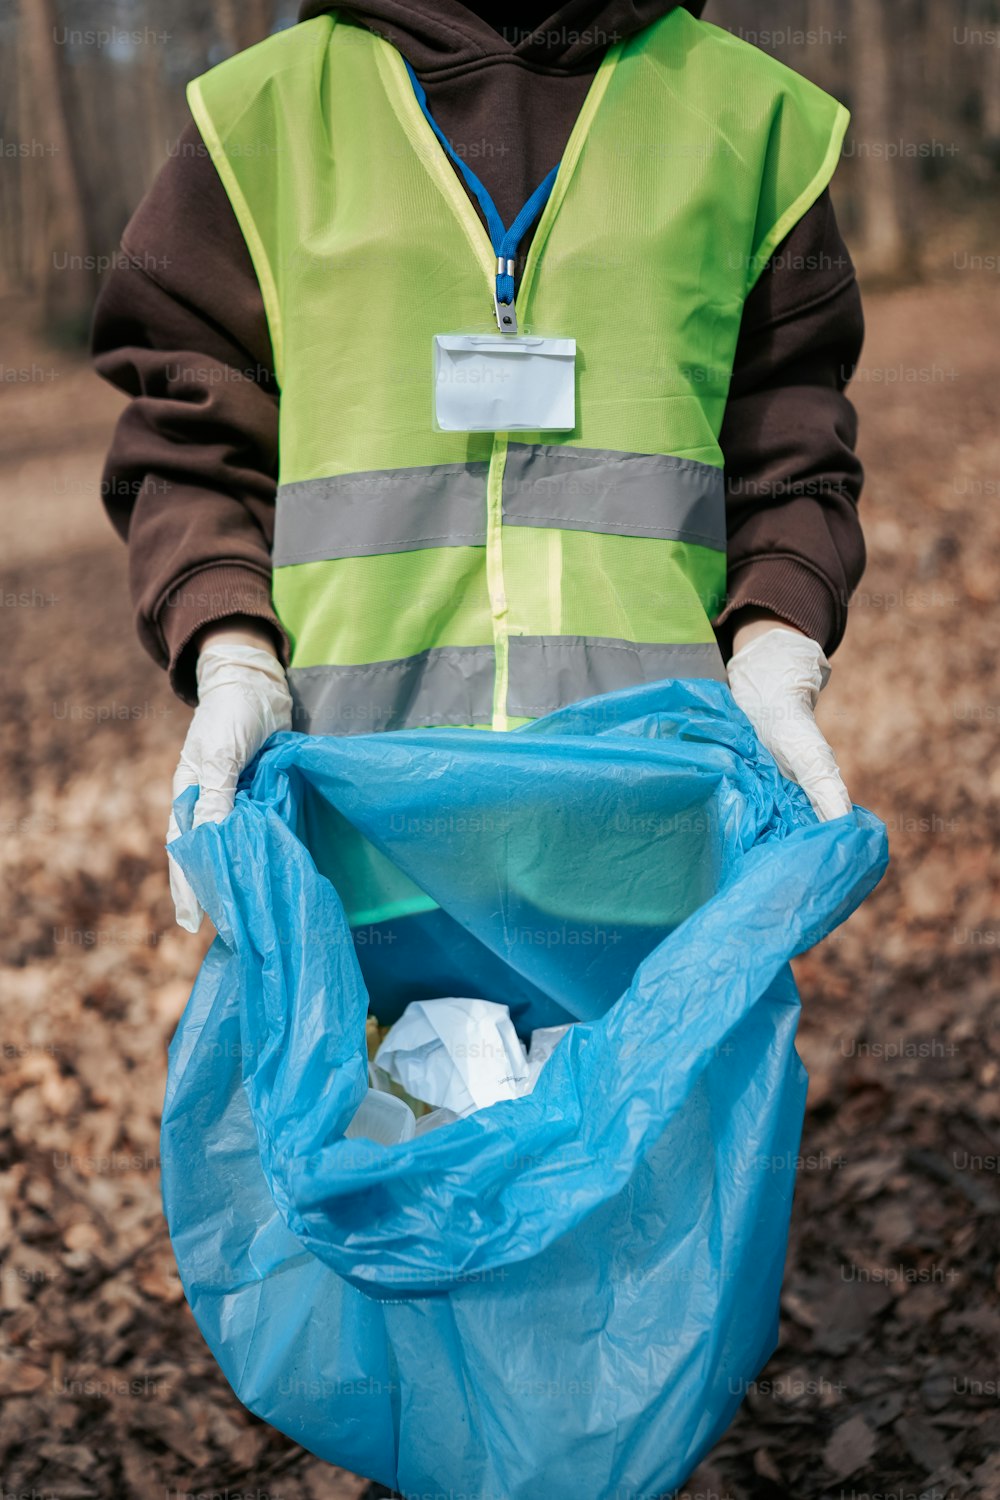 a person in a safety vest holding a blue bag